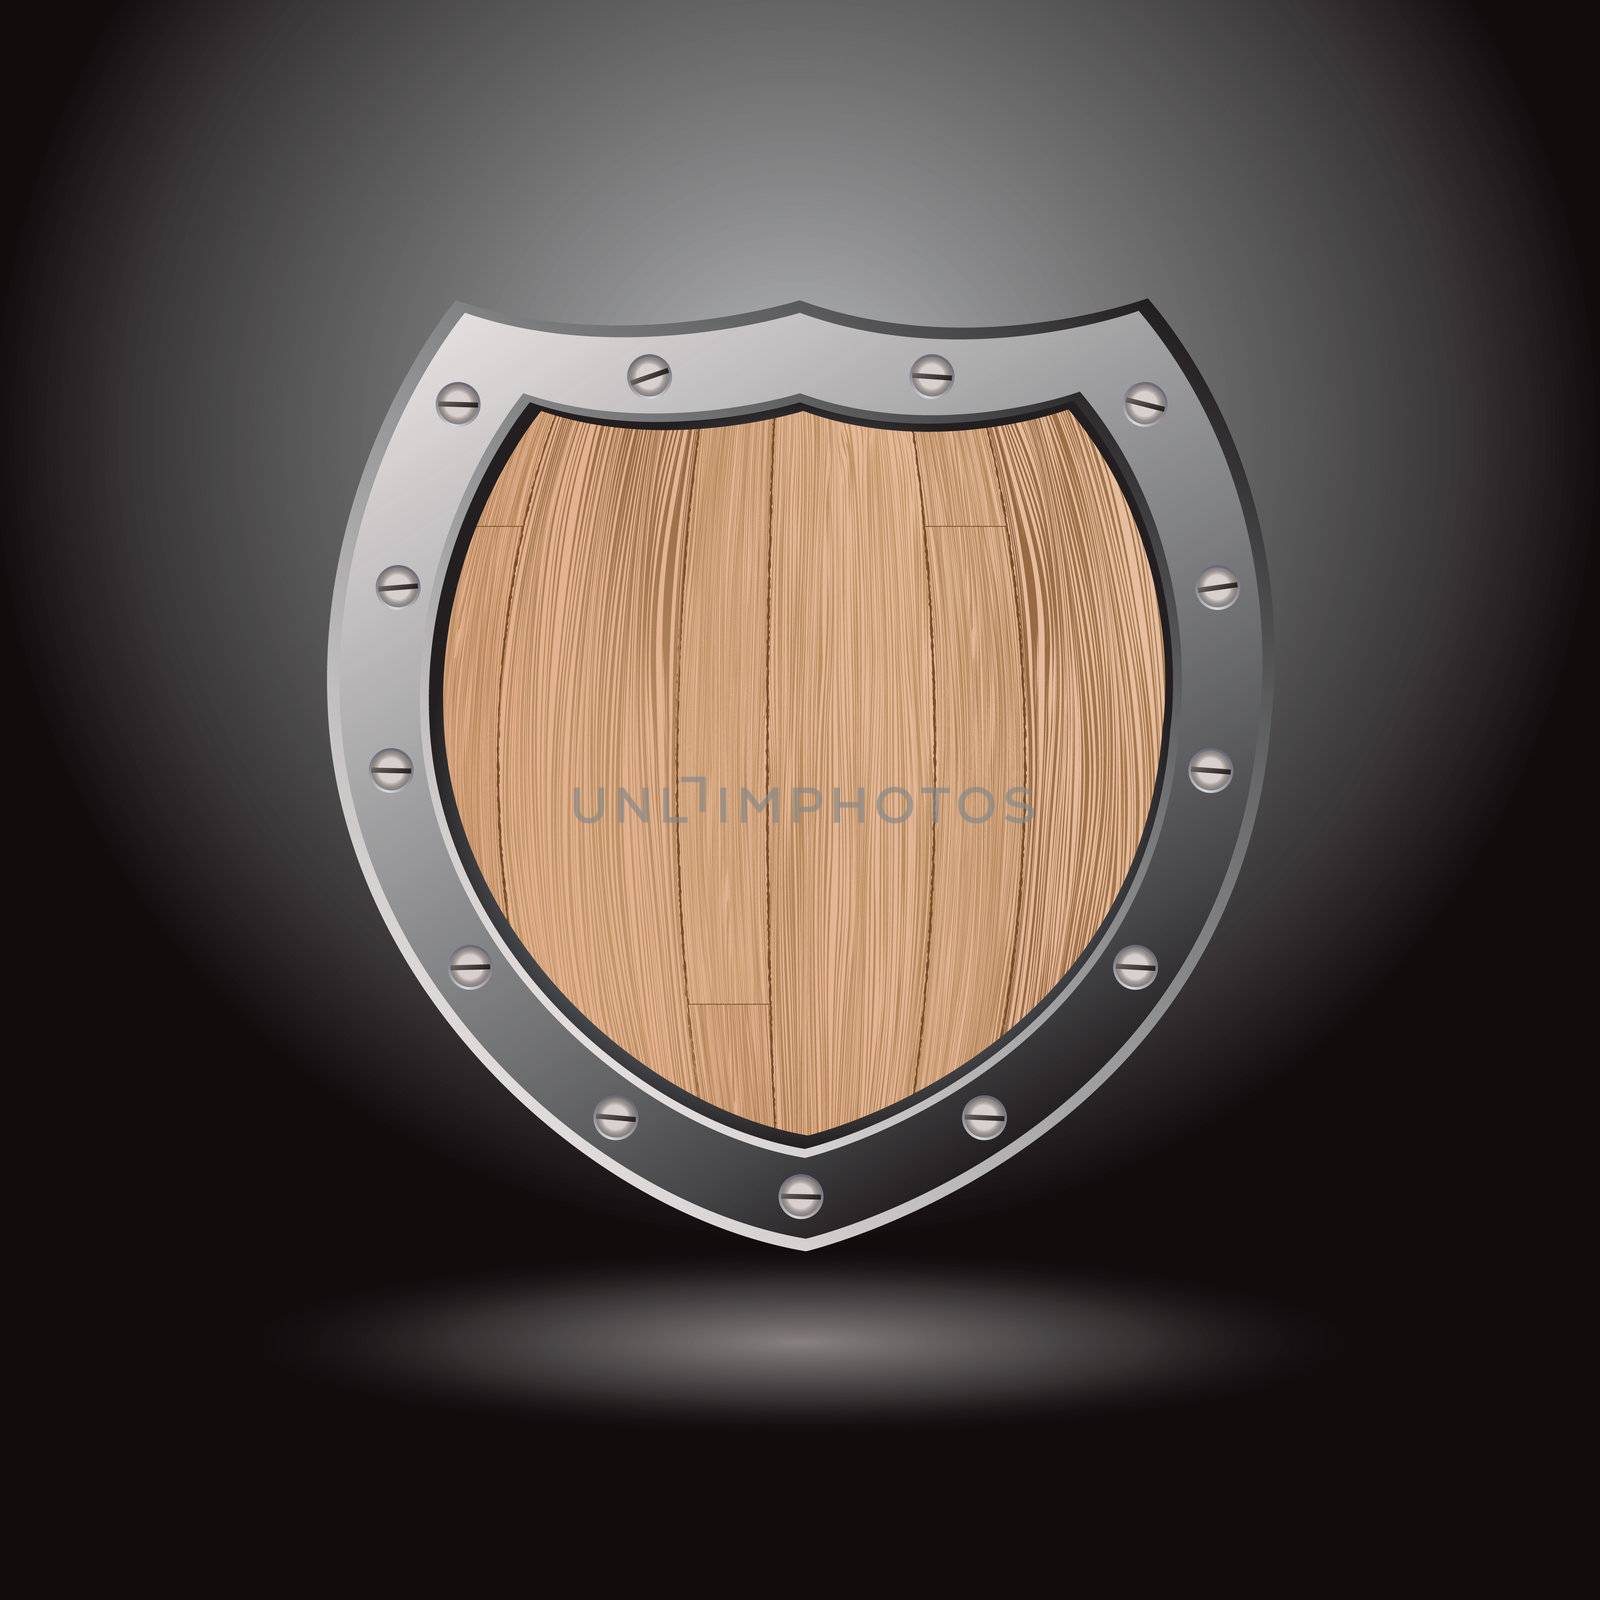 Protective wood shield icon with black background and spot light